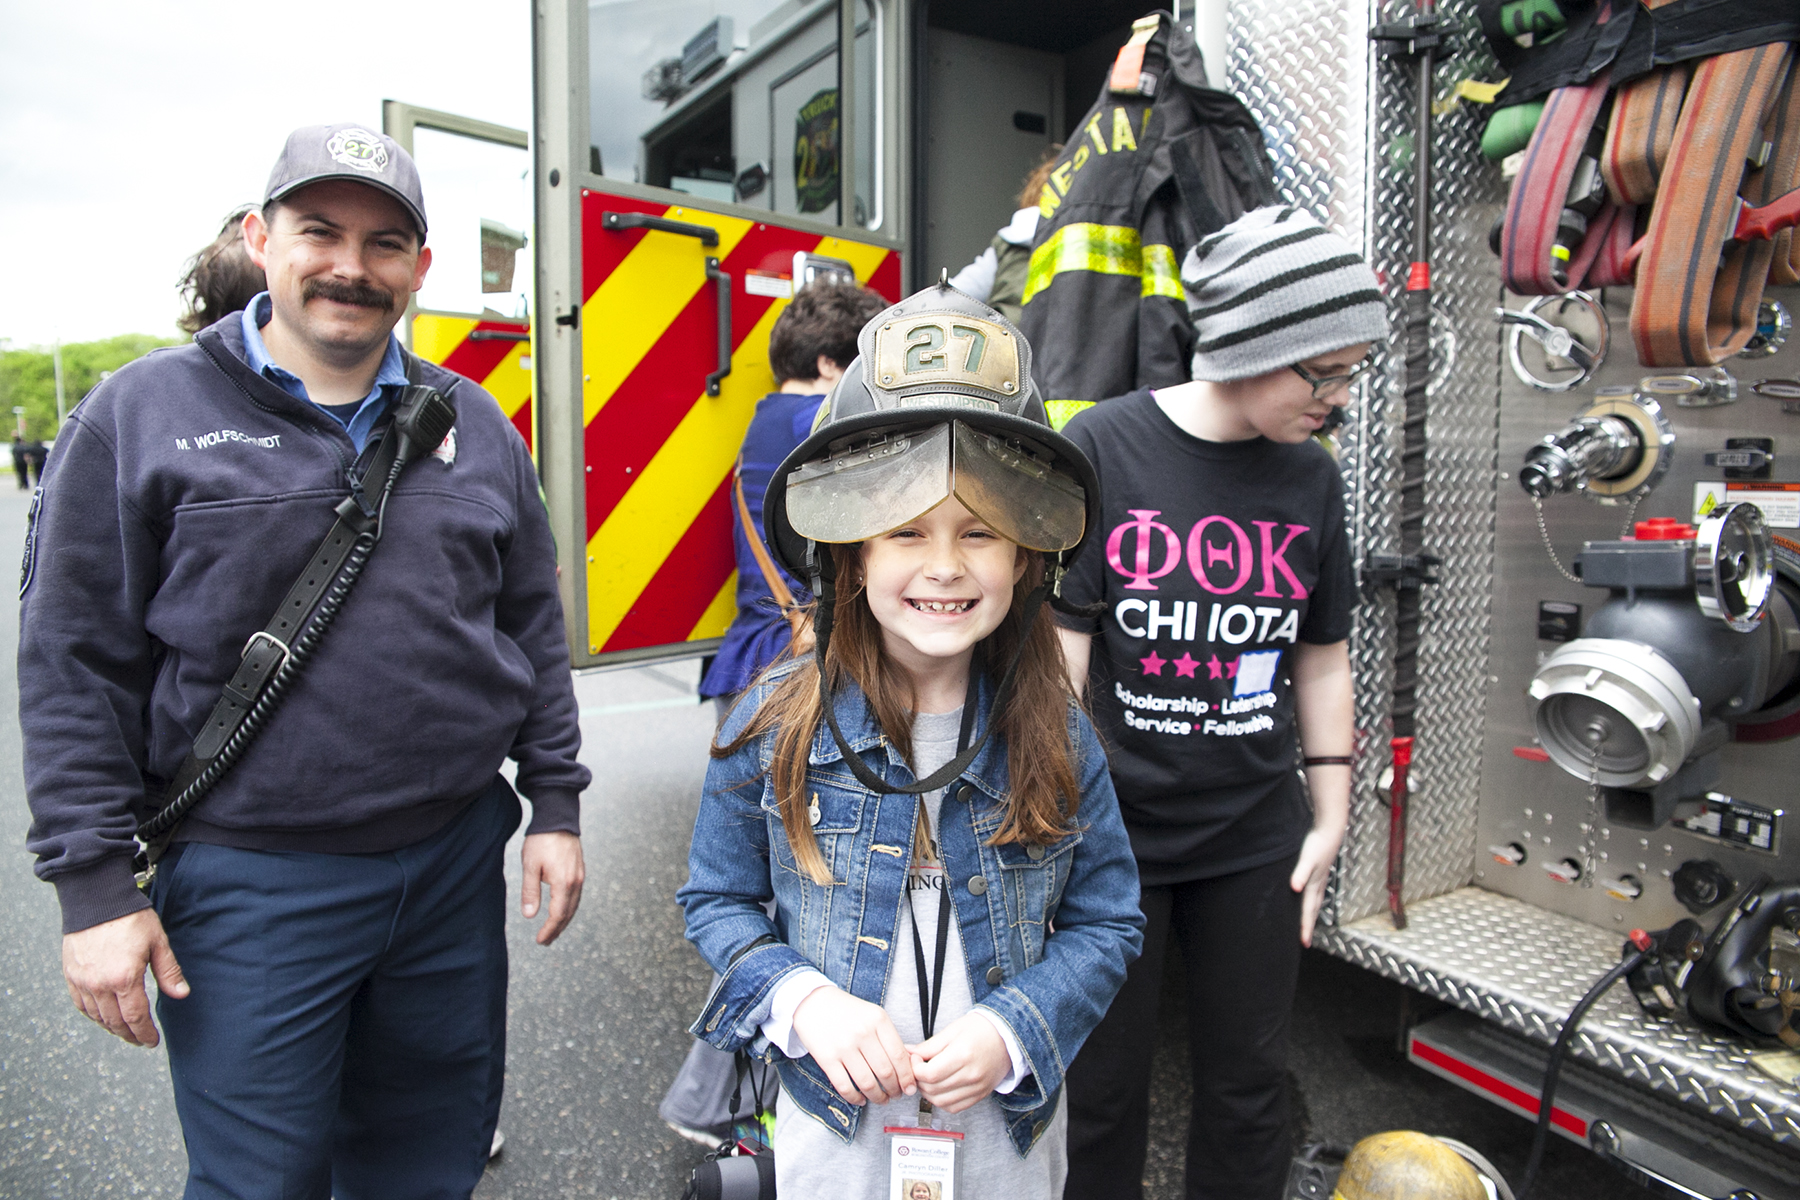 family next to fire truck, young girl wearing a fireman's hat